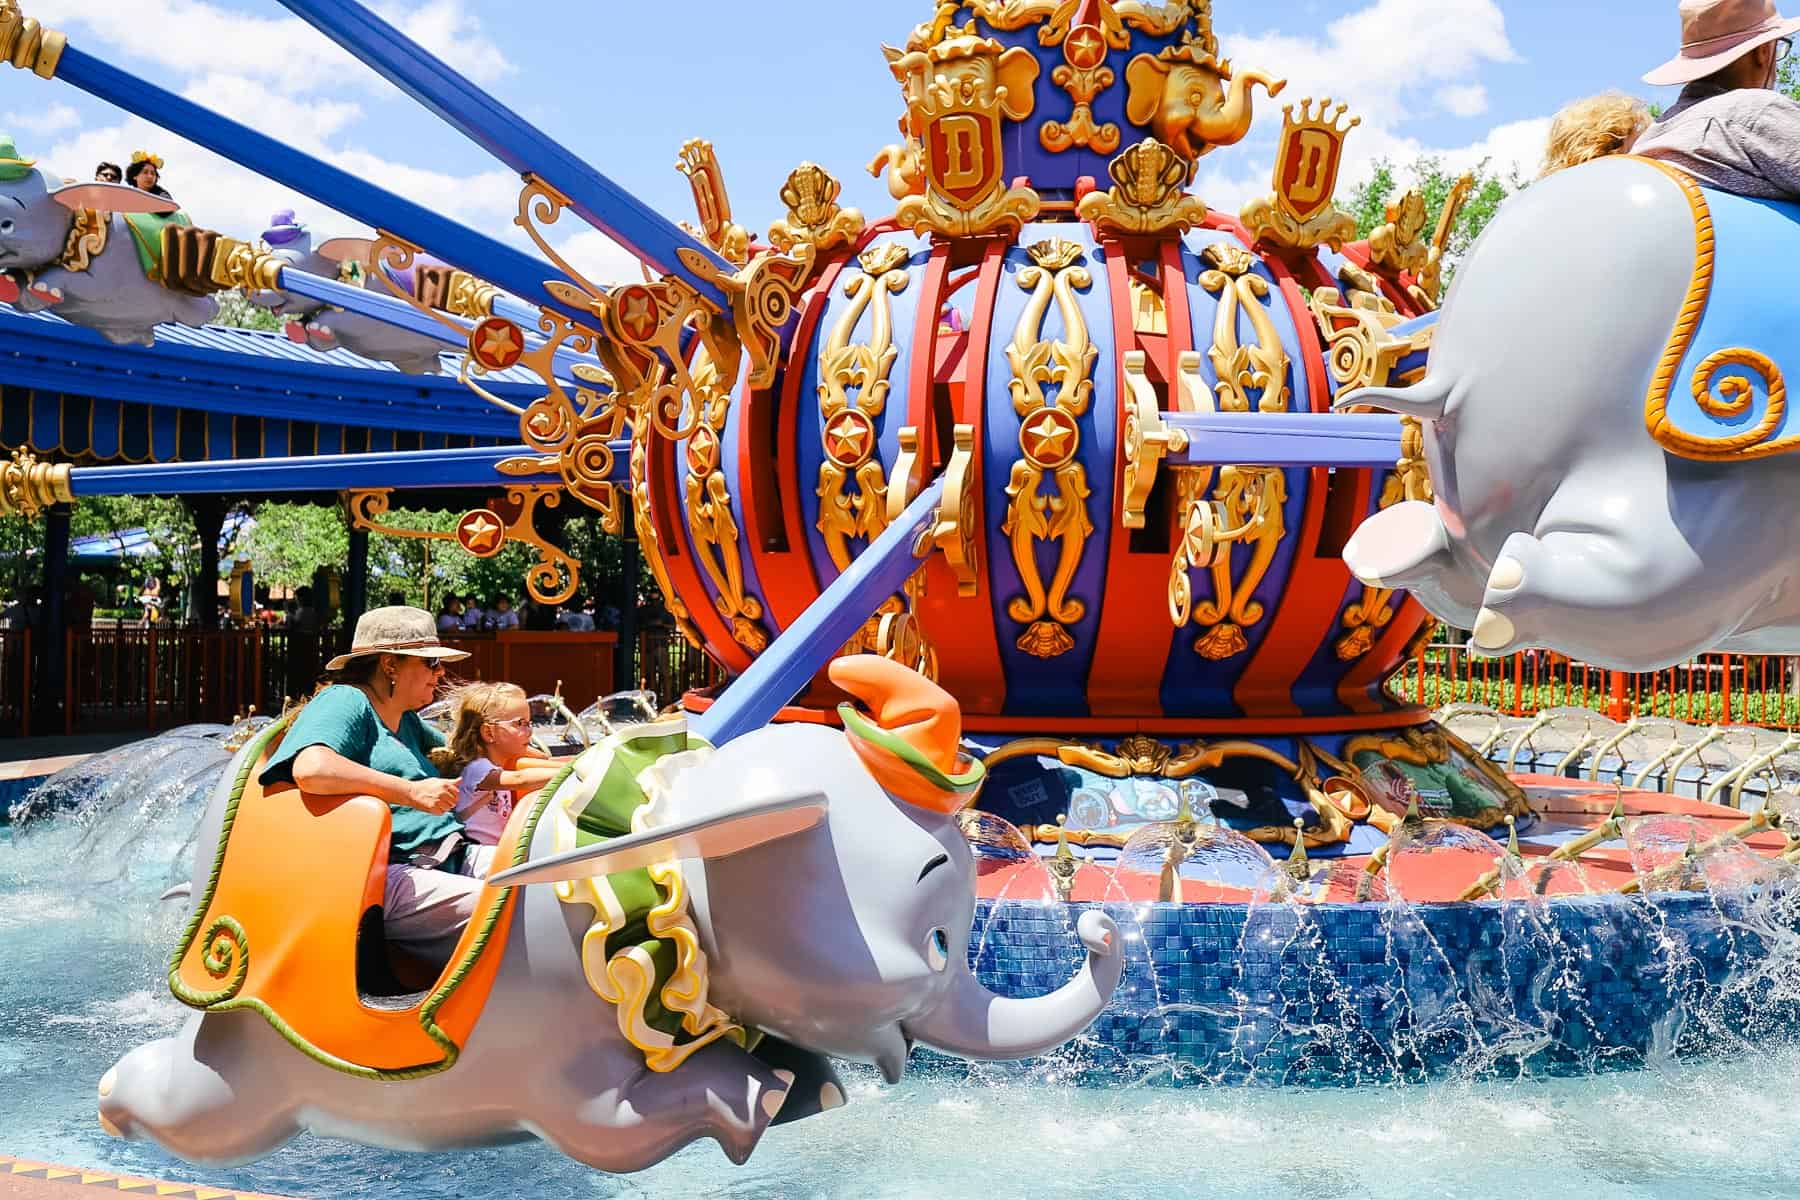 Guests riding Dumbo, the Flying Elephant. 